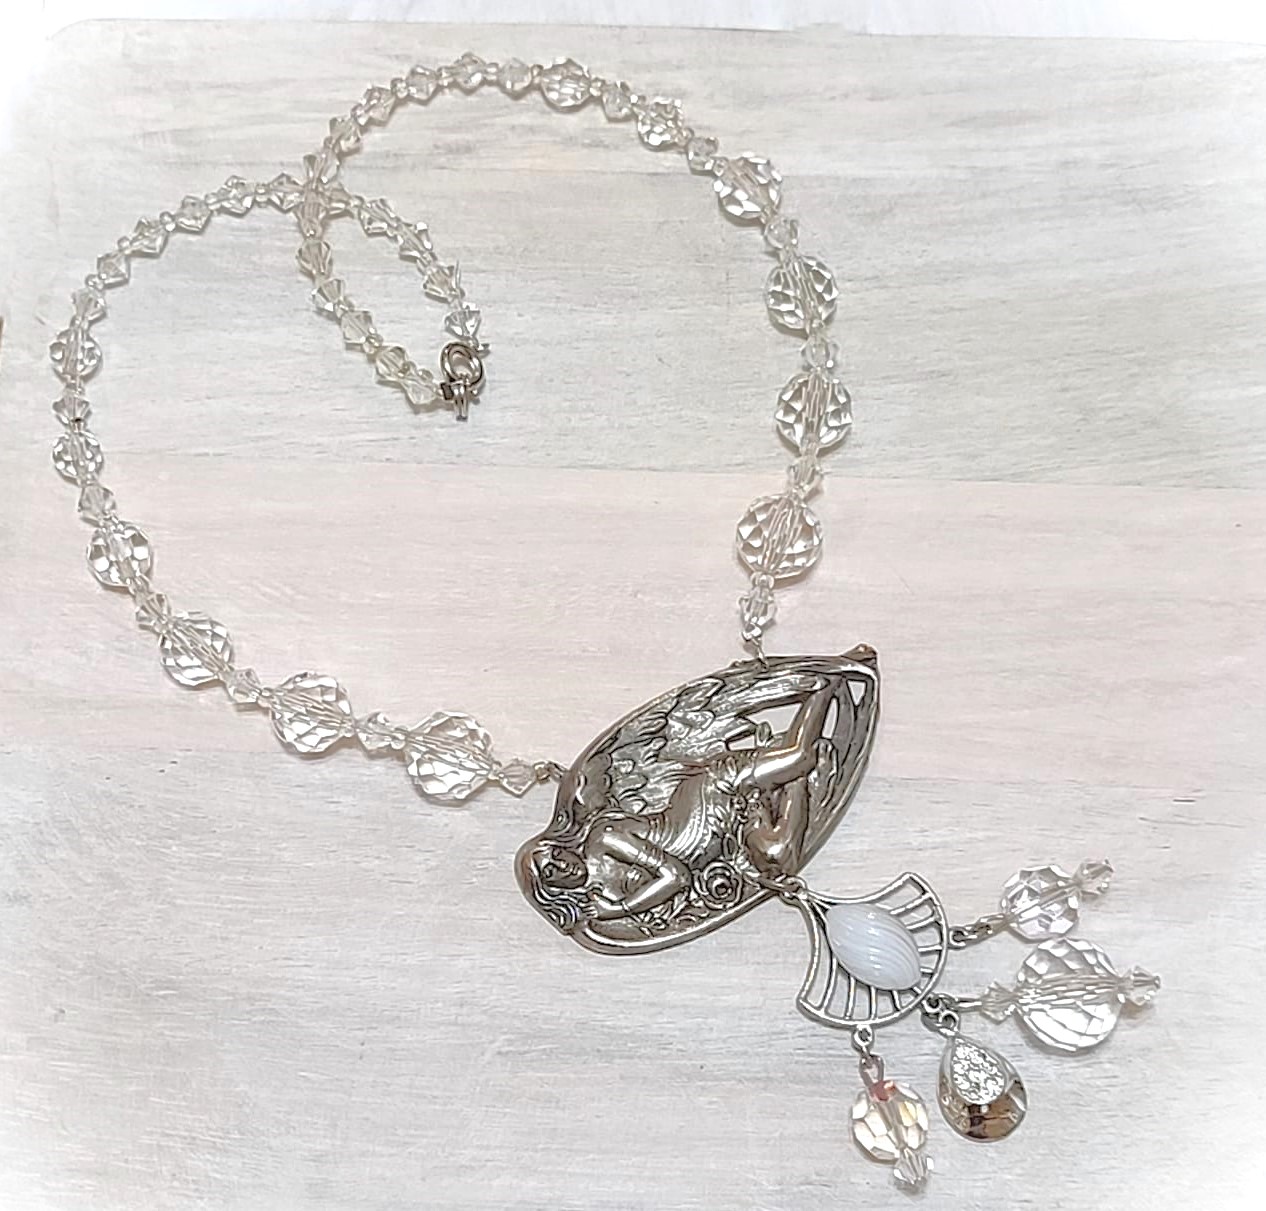 Art nouveau style drop pendant necklace with crystal beads